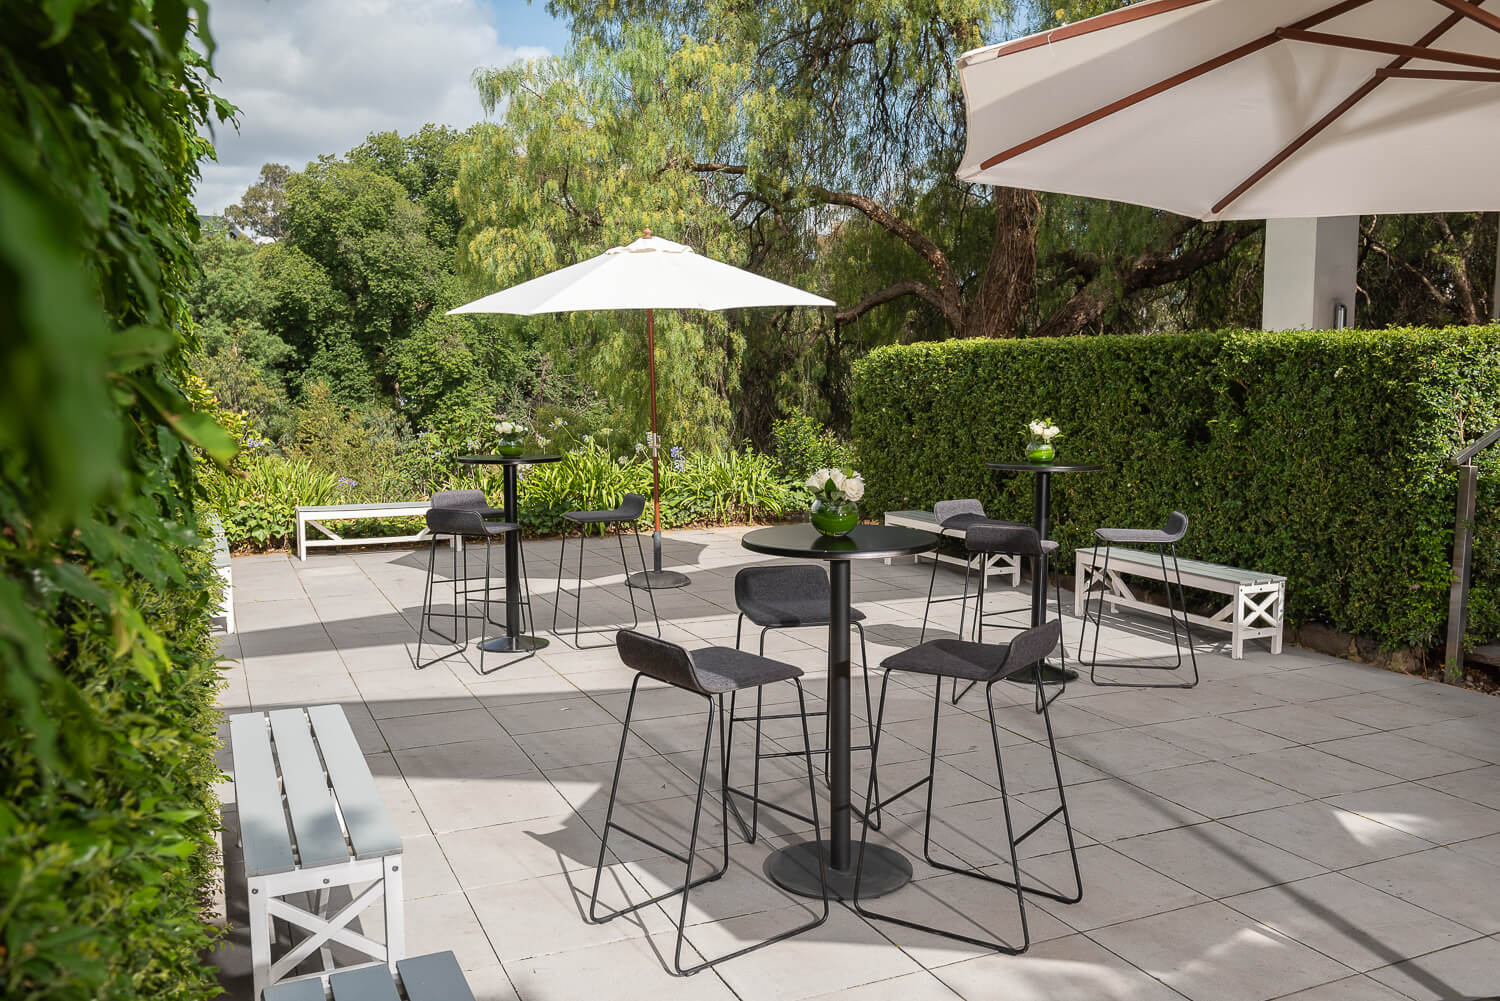 Outdoor seating area at Leonda by the Yarra, featuring tables and umbrellas for a delightful al fresco experience.